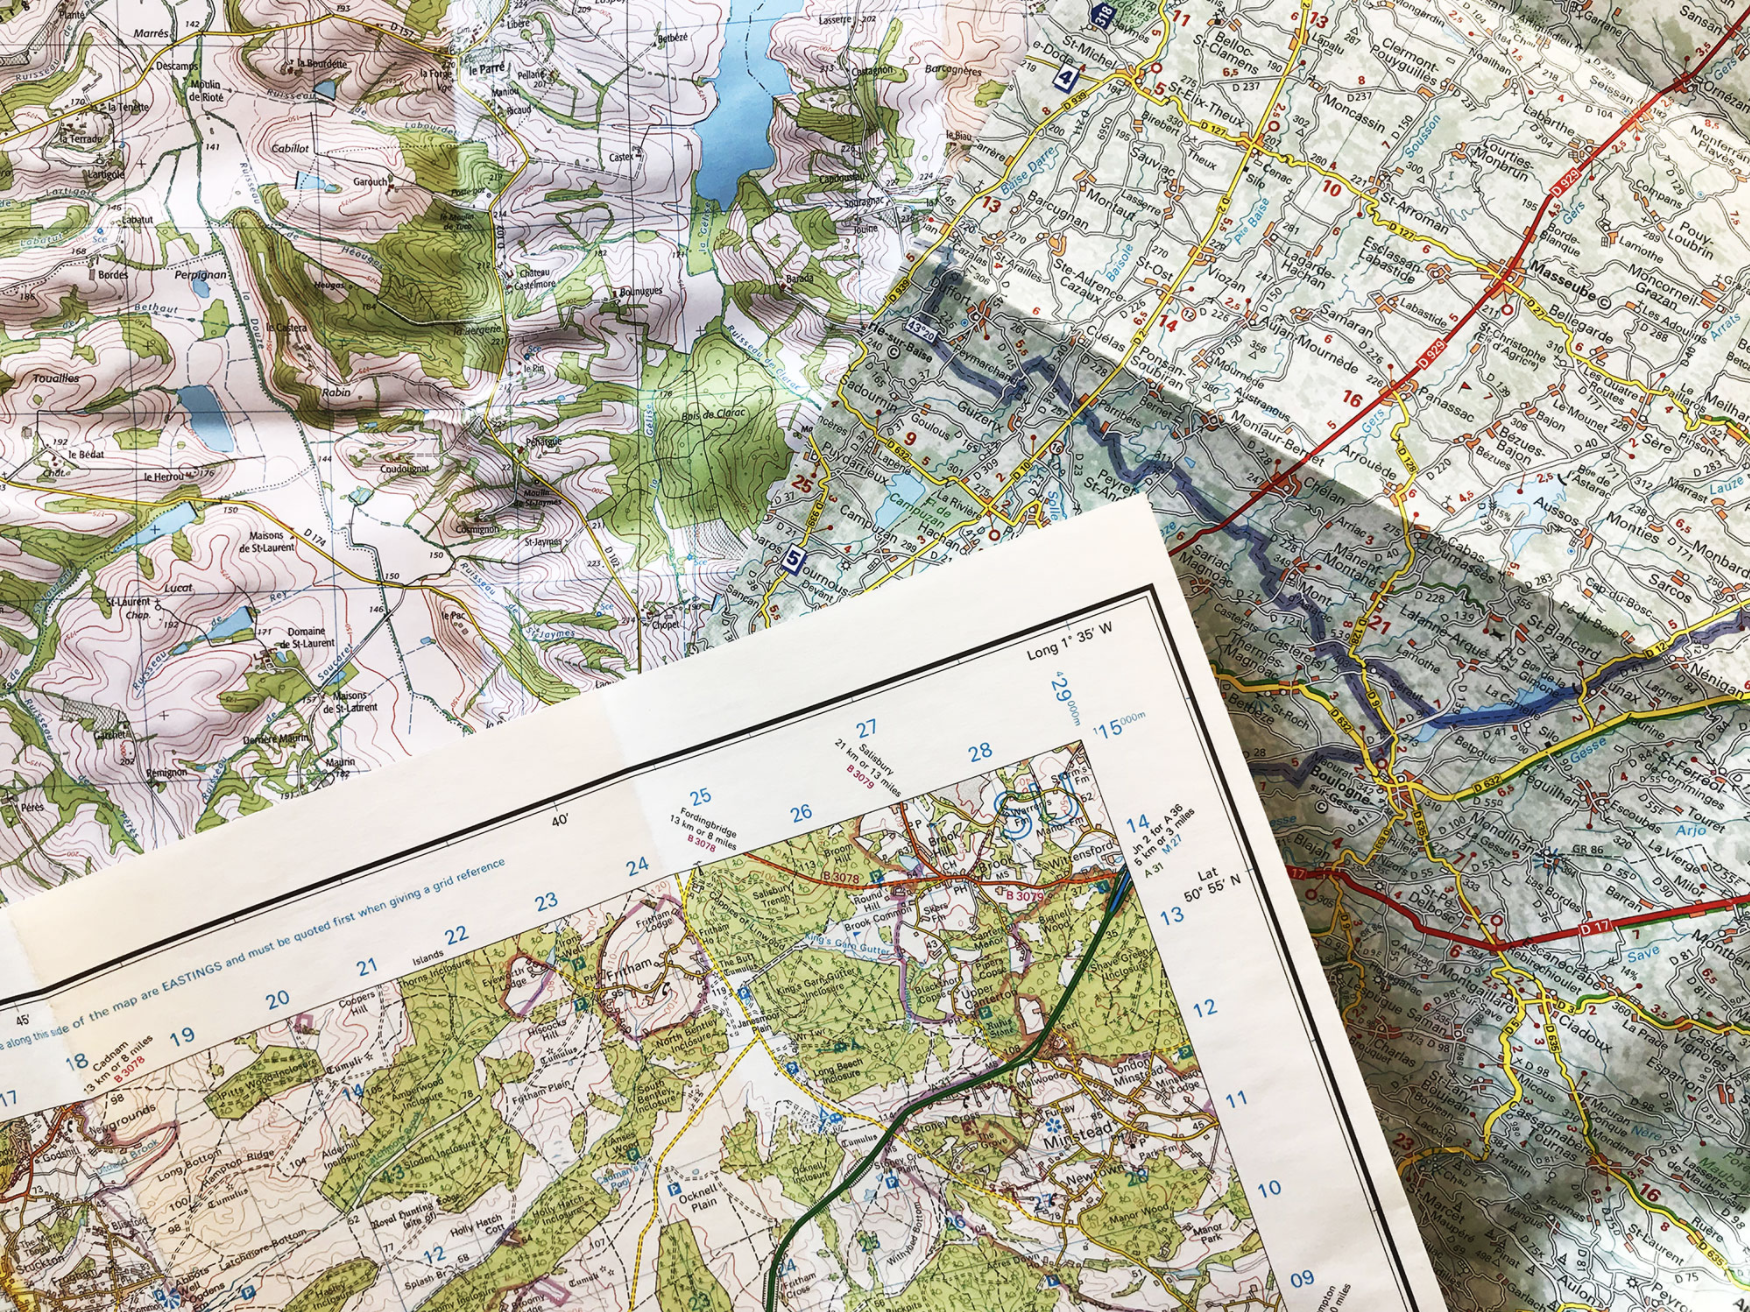 Enter the GSO Map-a-Thon competition for a chance to win one of two prizes.